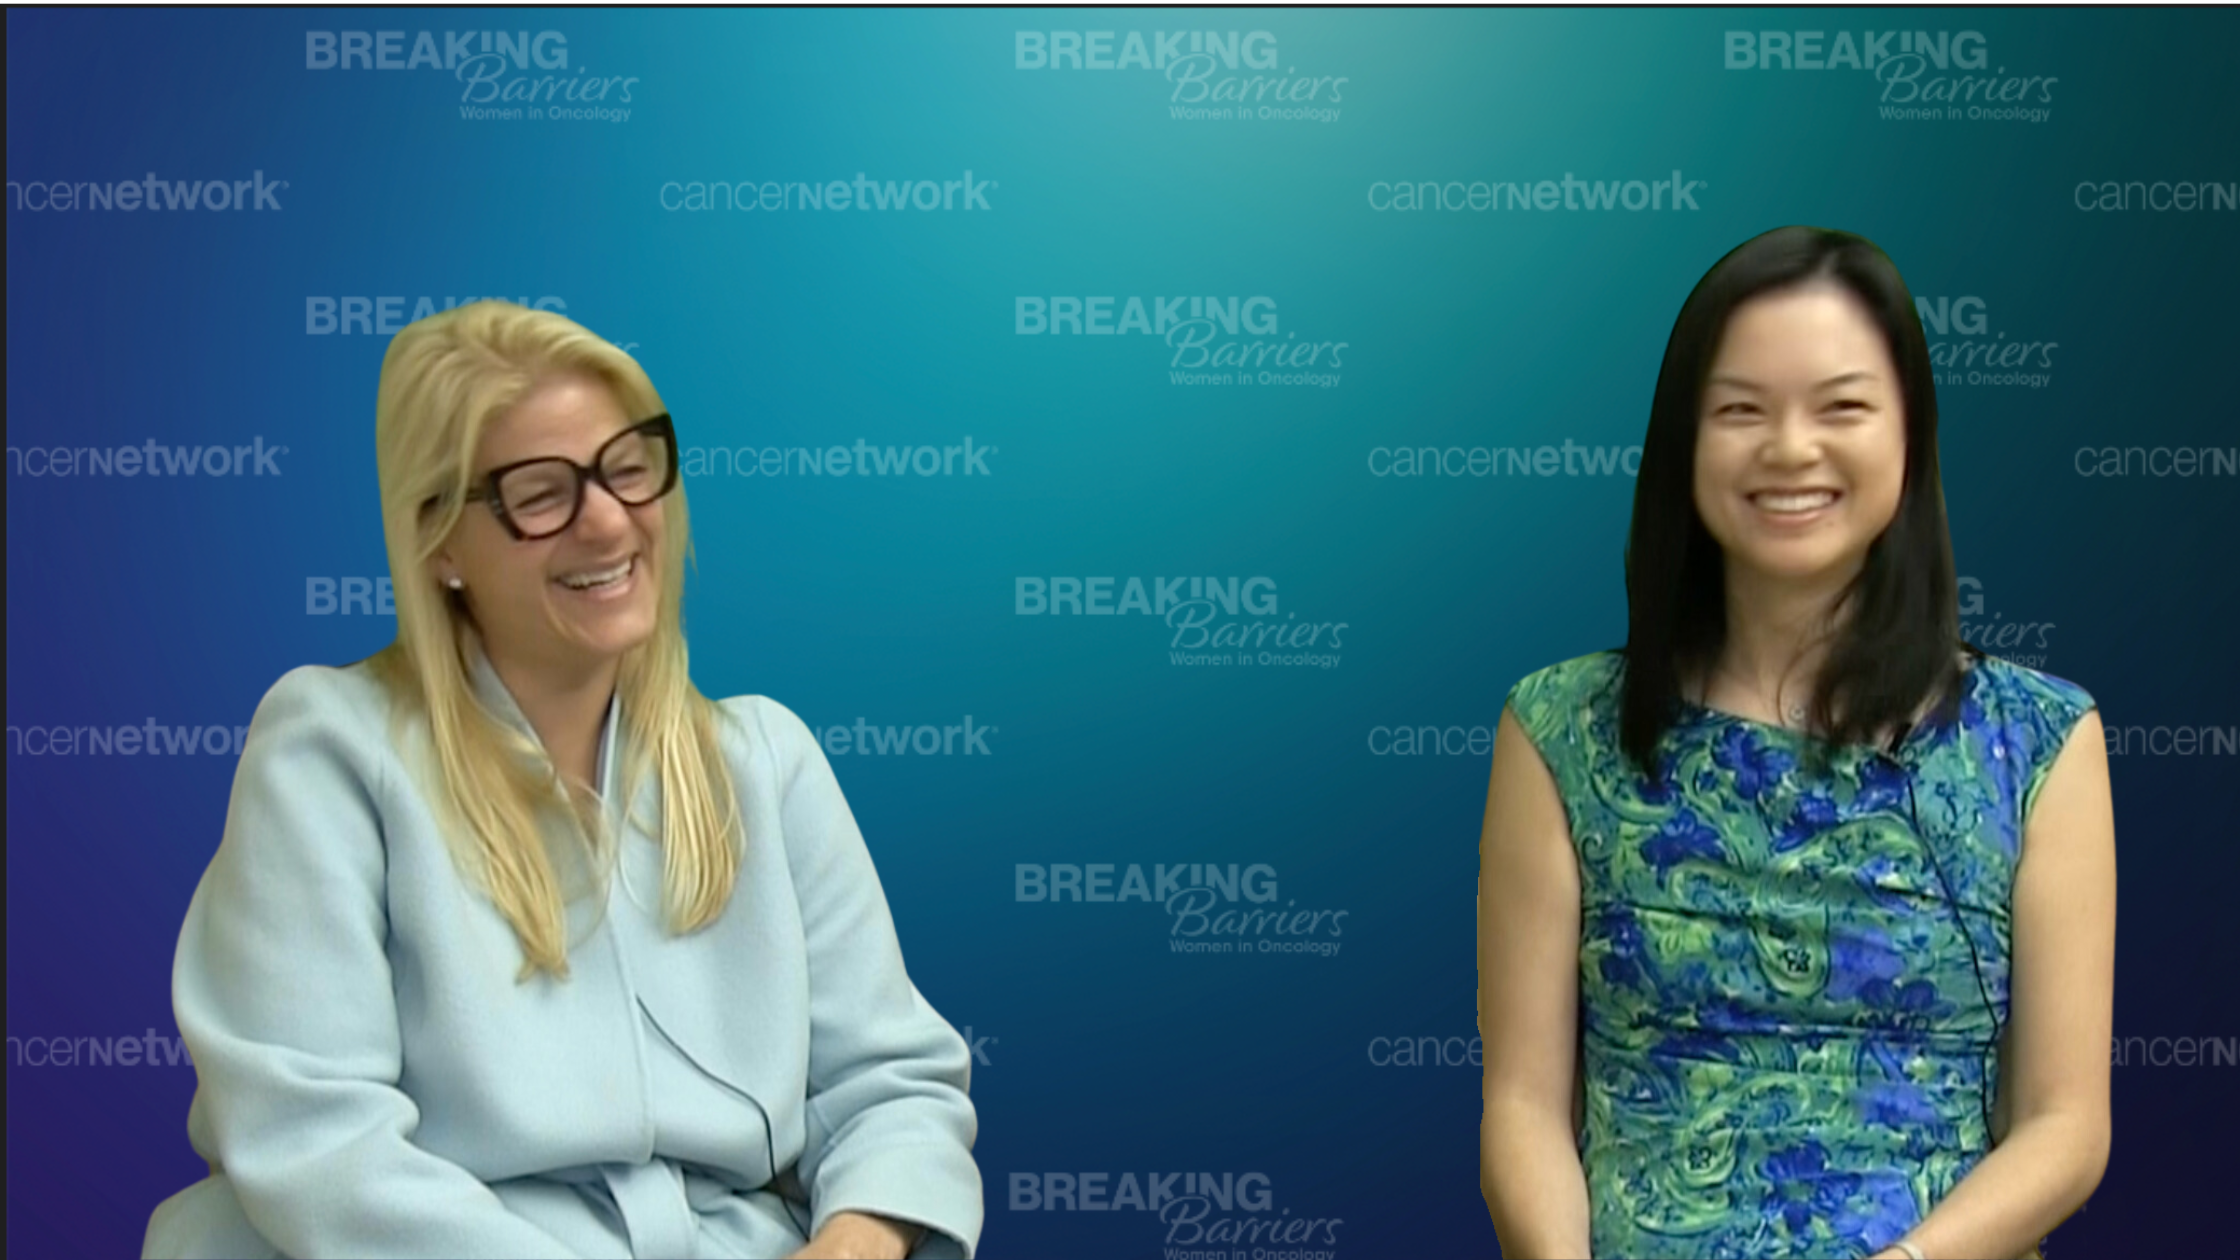 Incorporating Collaboration and Personalization of Treatment in Breast Cancer Care